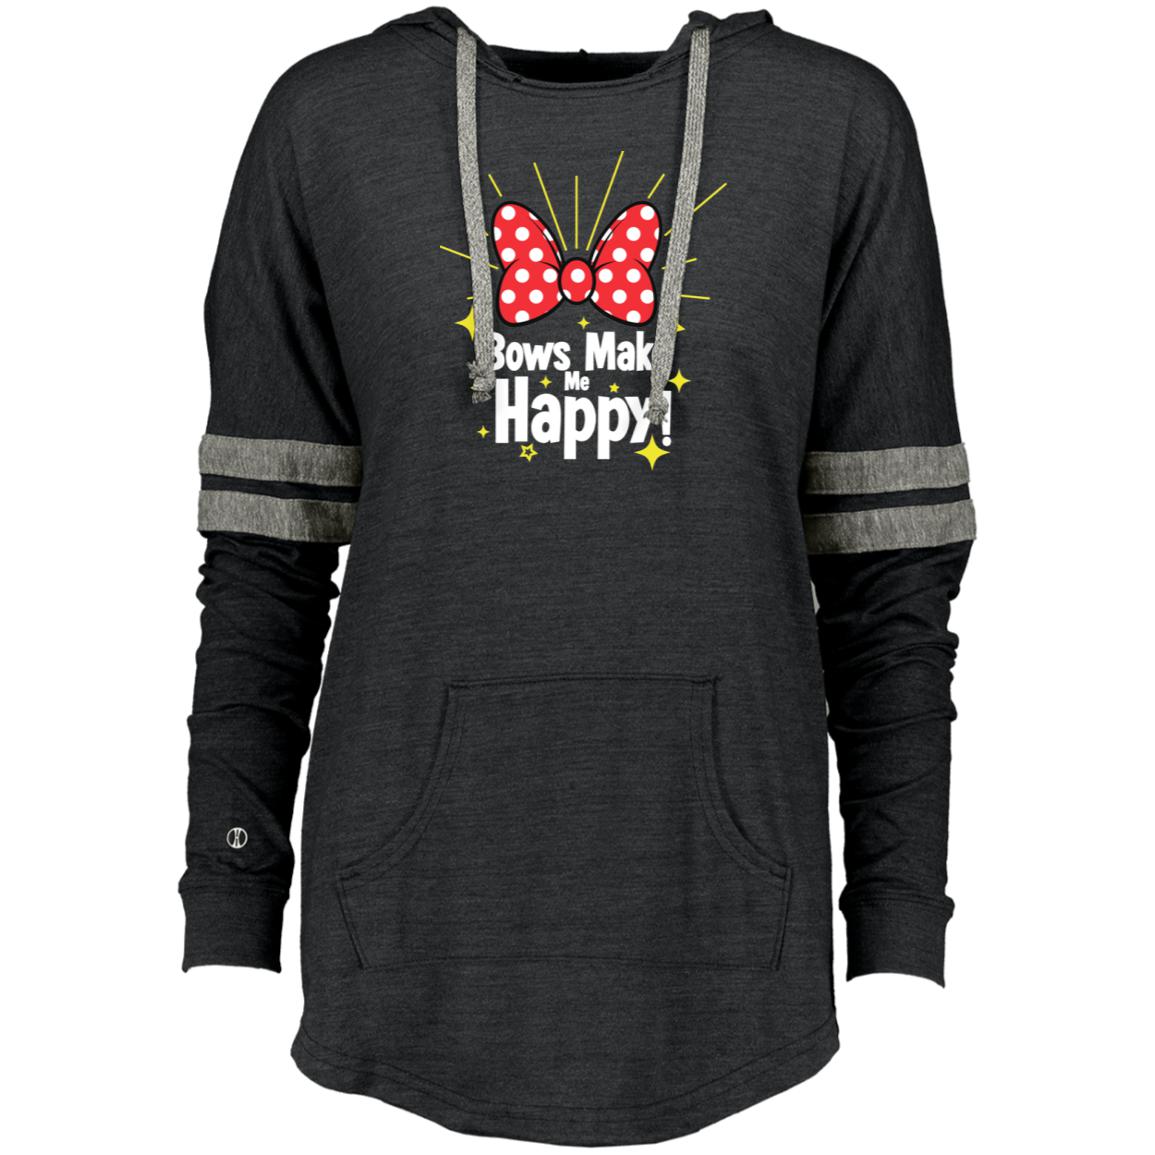 Bows Make Me Happy - Holloway Ladies Hooded Low Key Pullover